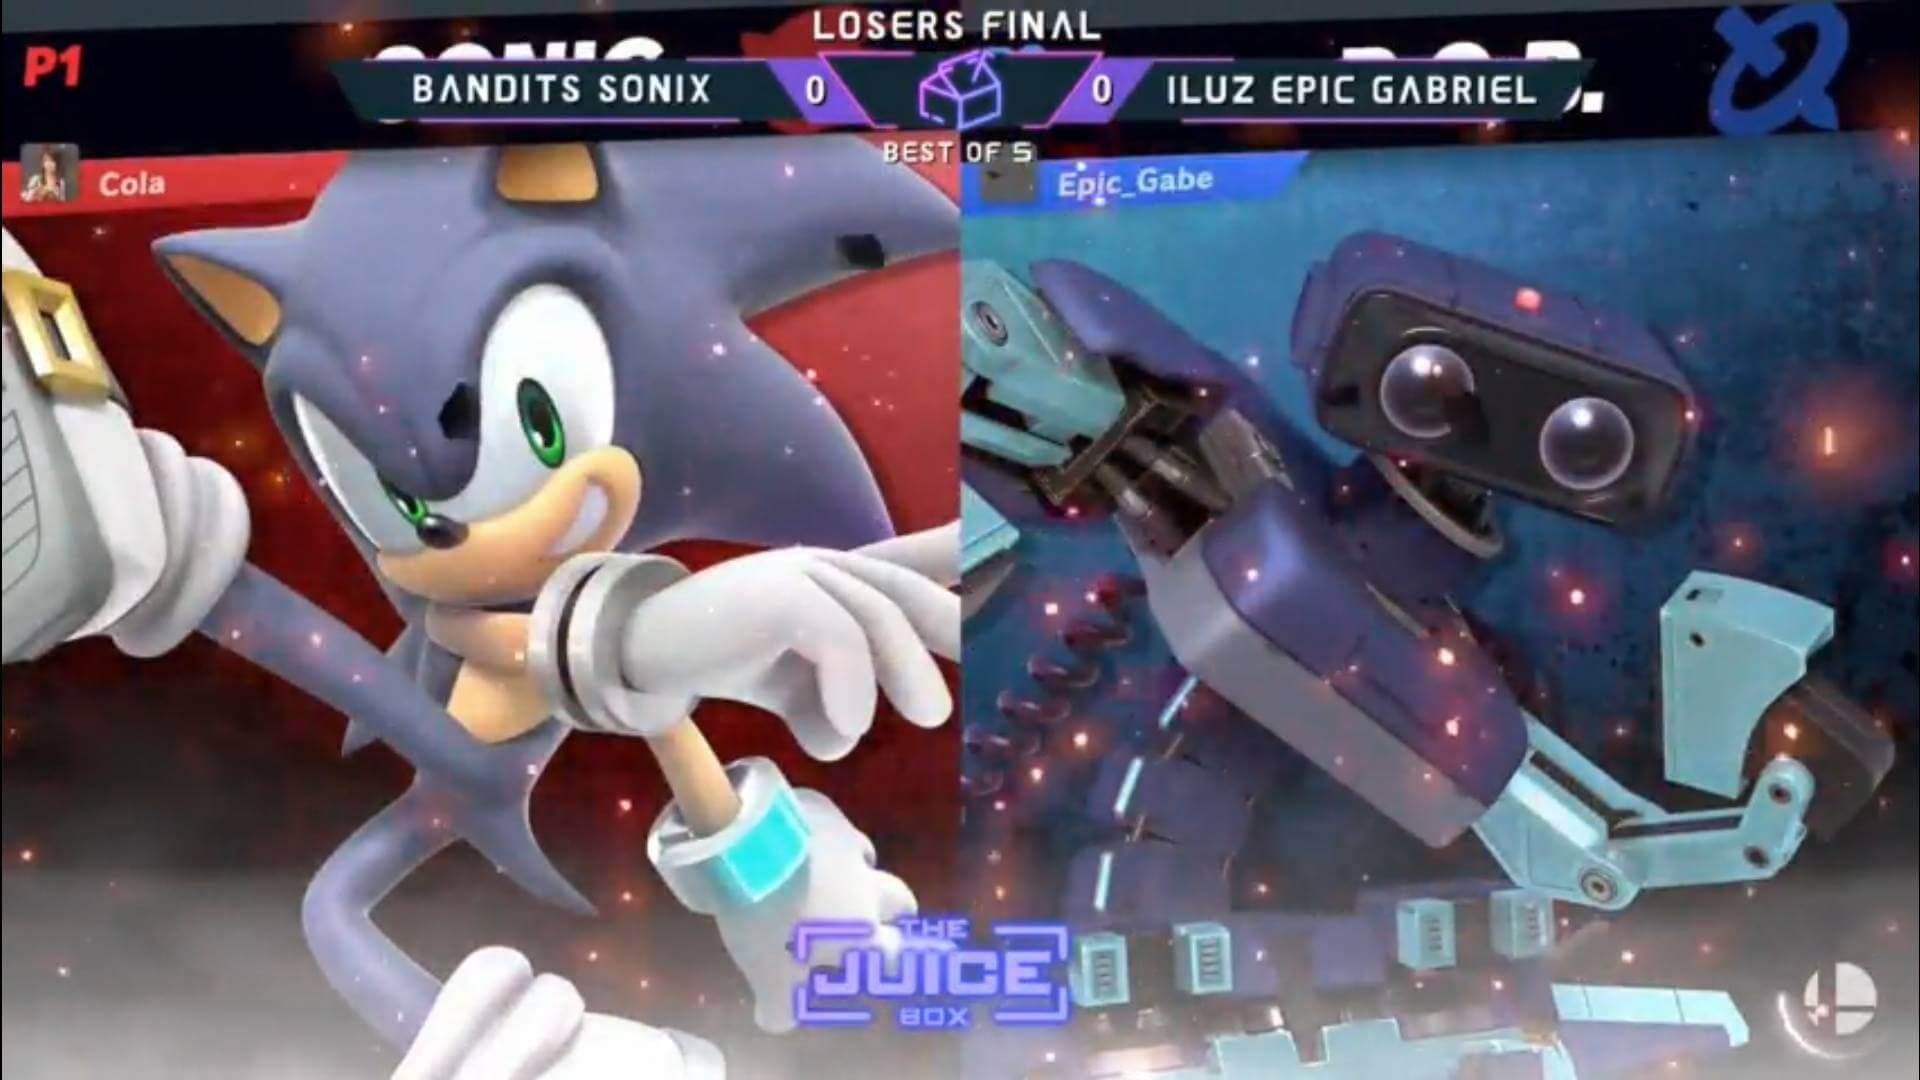 Another SSBU Juice Box Victory for Sonix